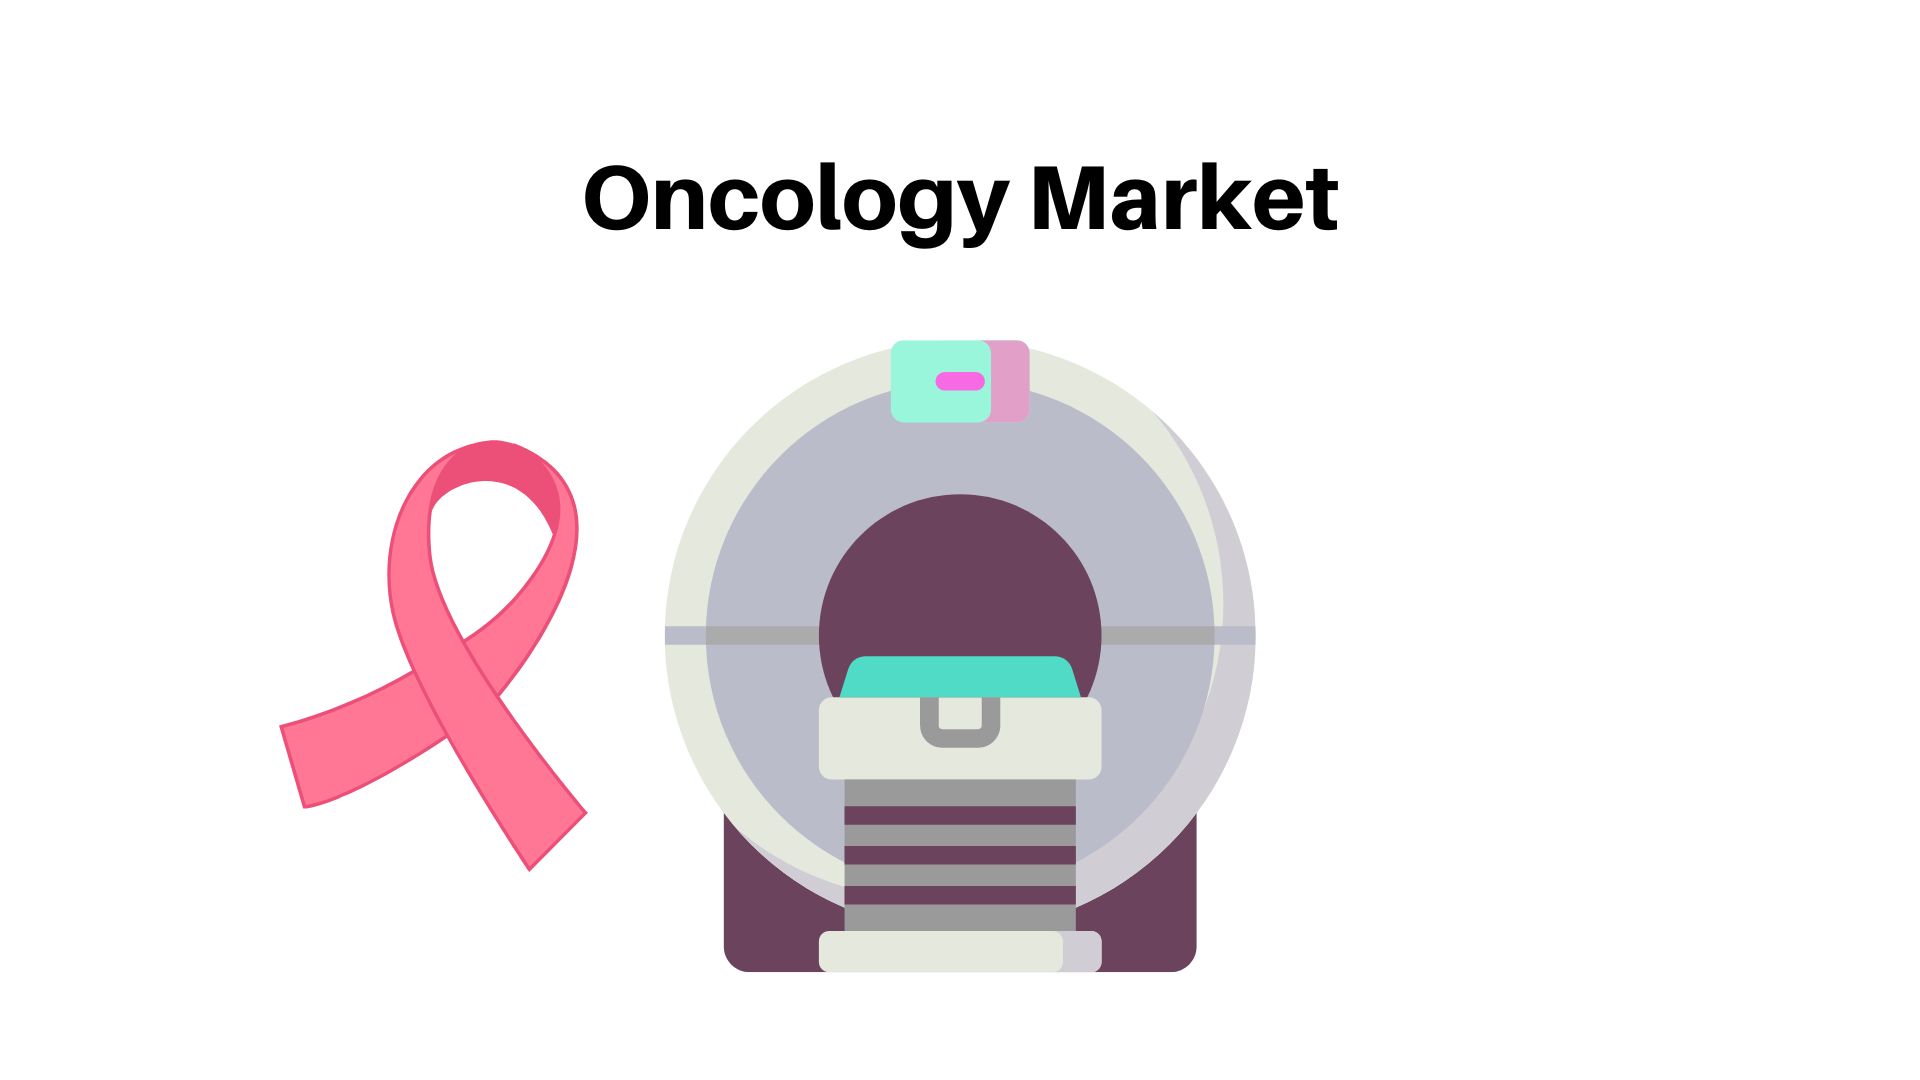 Oncology Market Is Encouraged to Reach USD 646.33 Billion by 2032